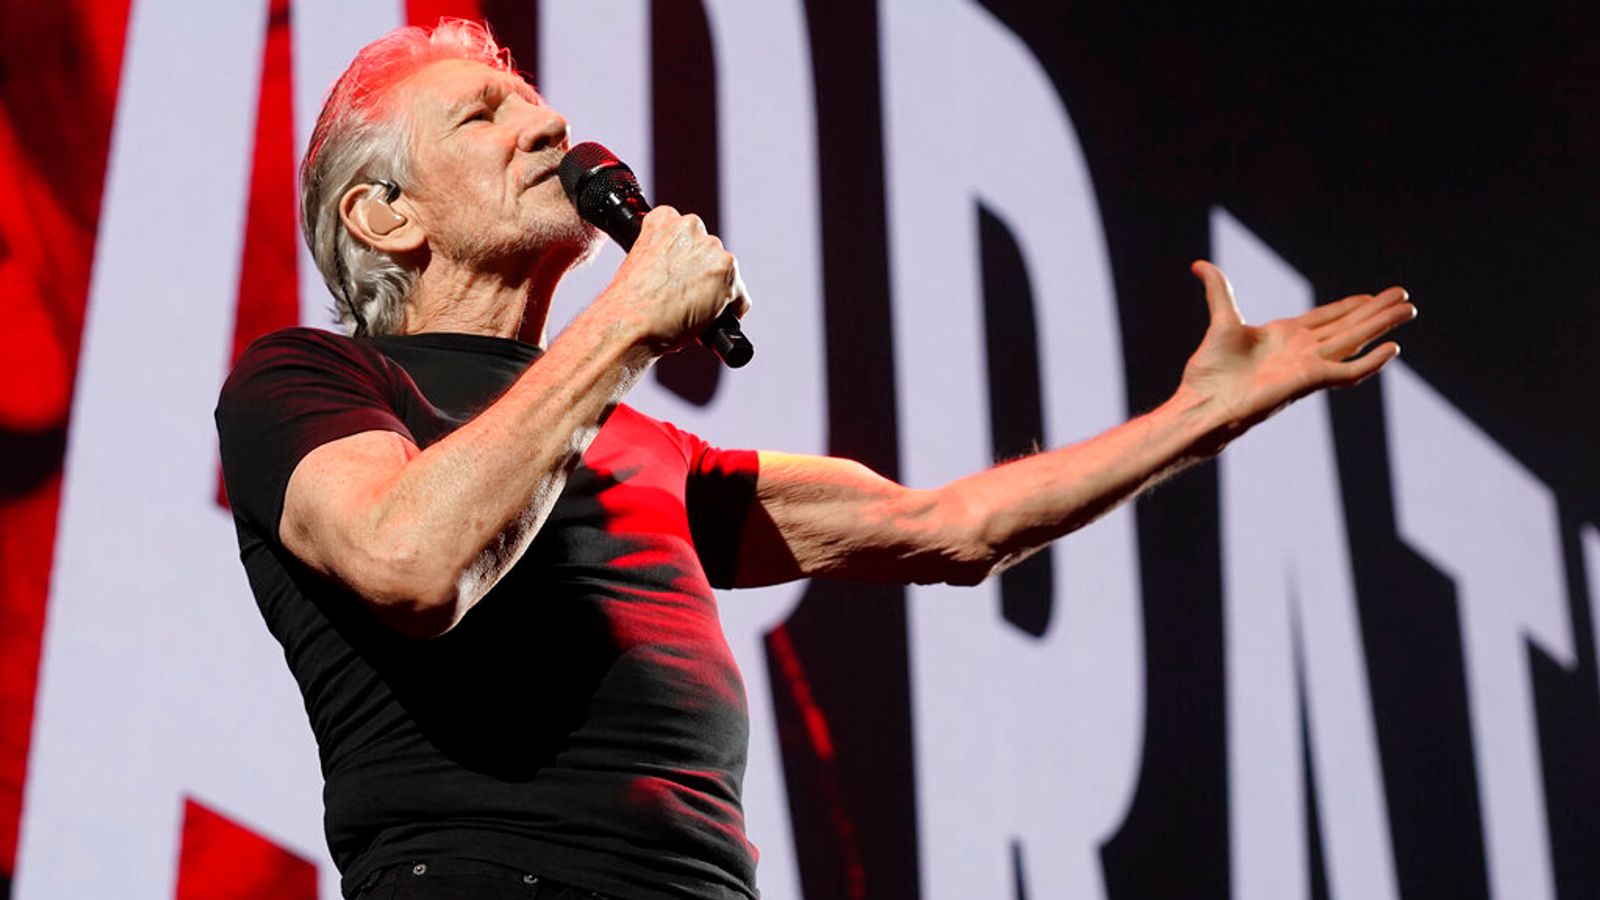 Roger Waters takes legal action over axing of concerts he calls a 'blatant attempt to silence me' amid antisemitism claims